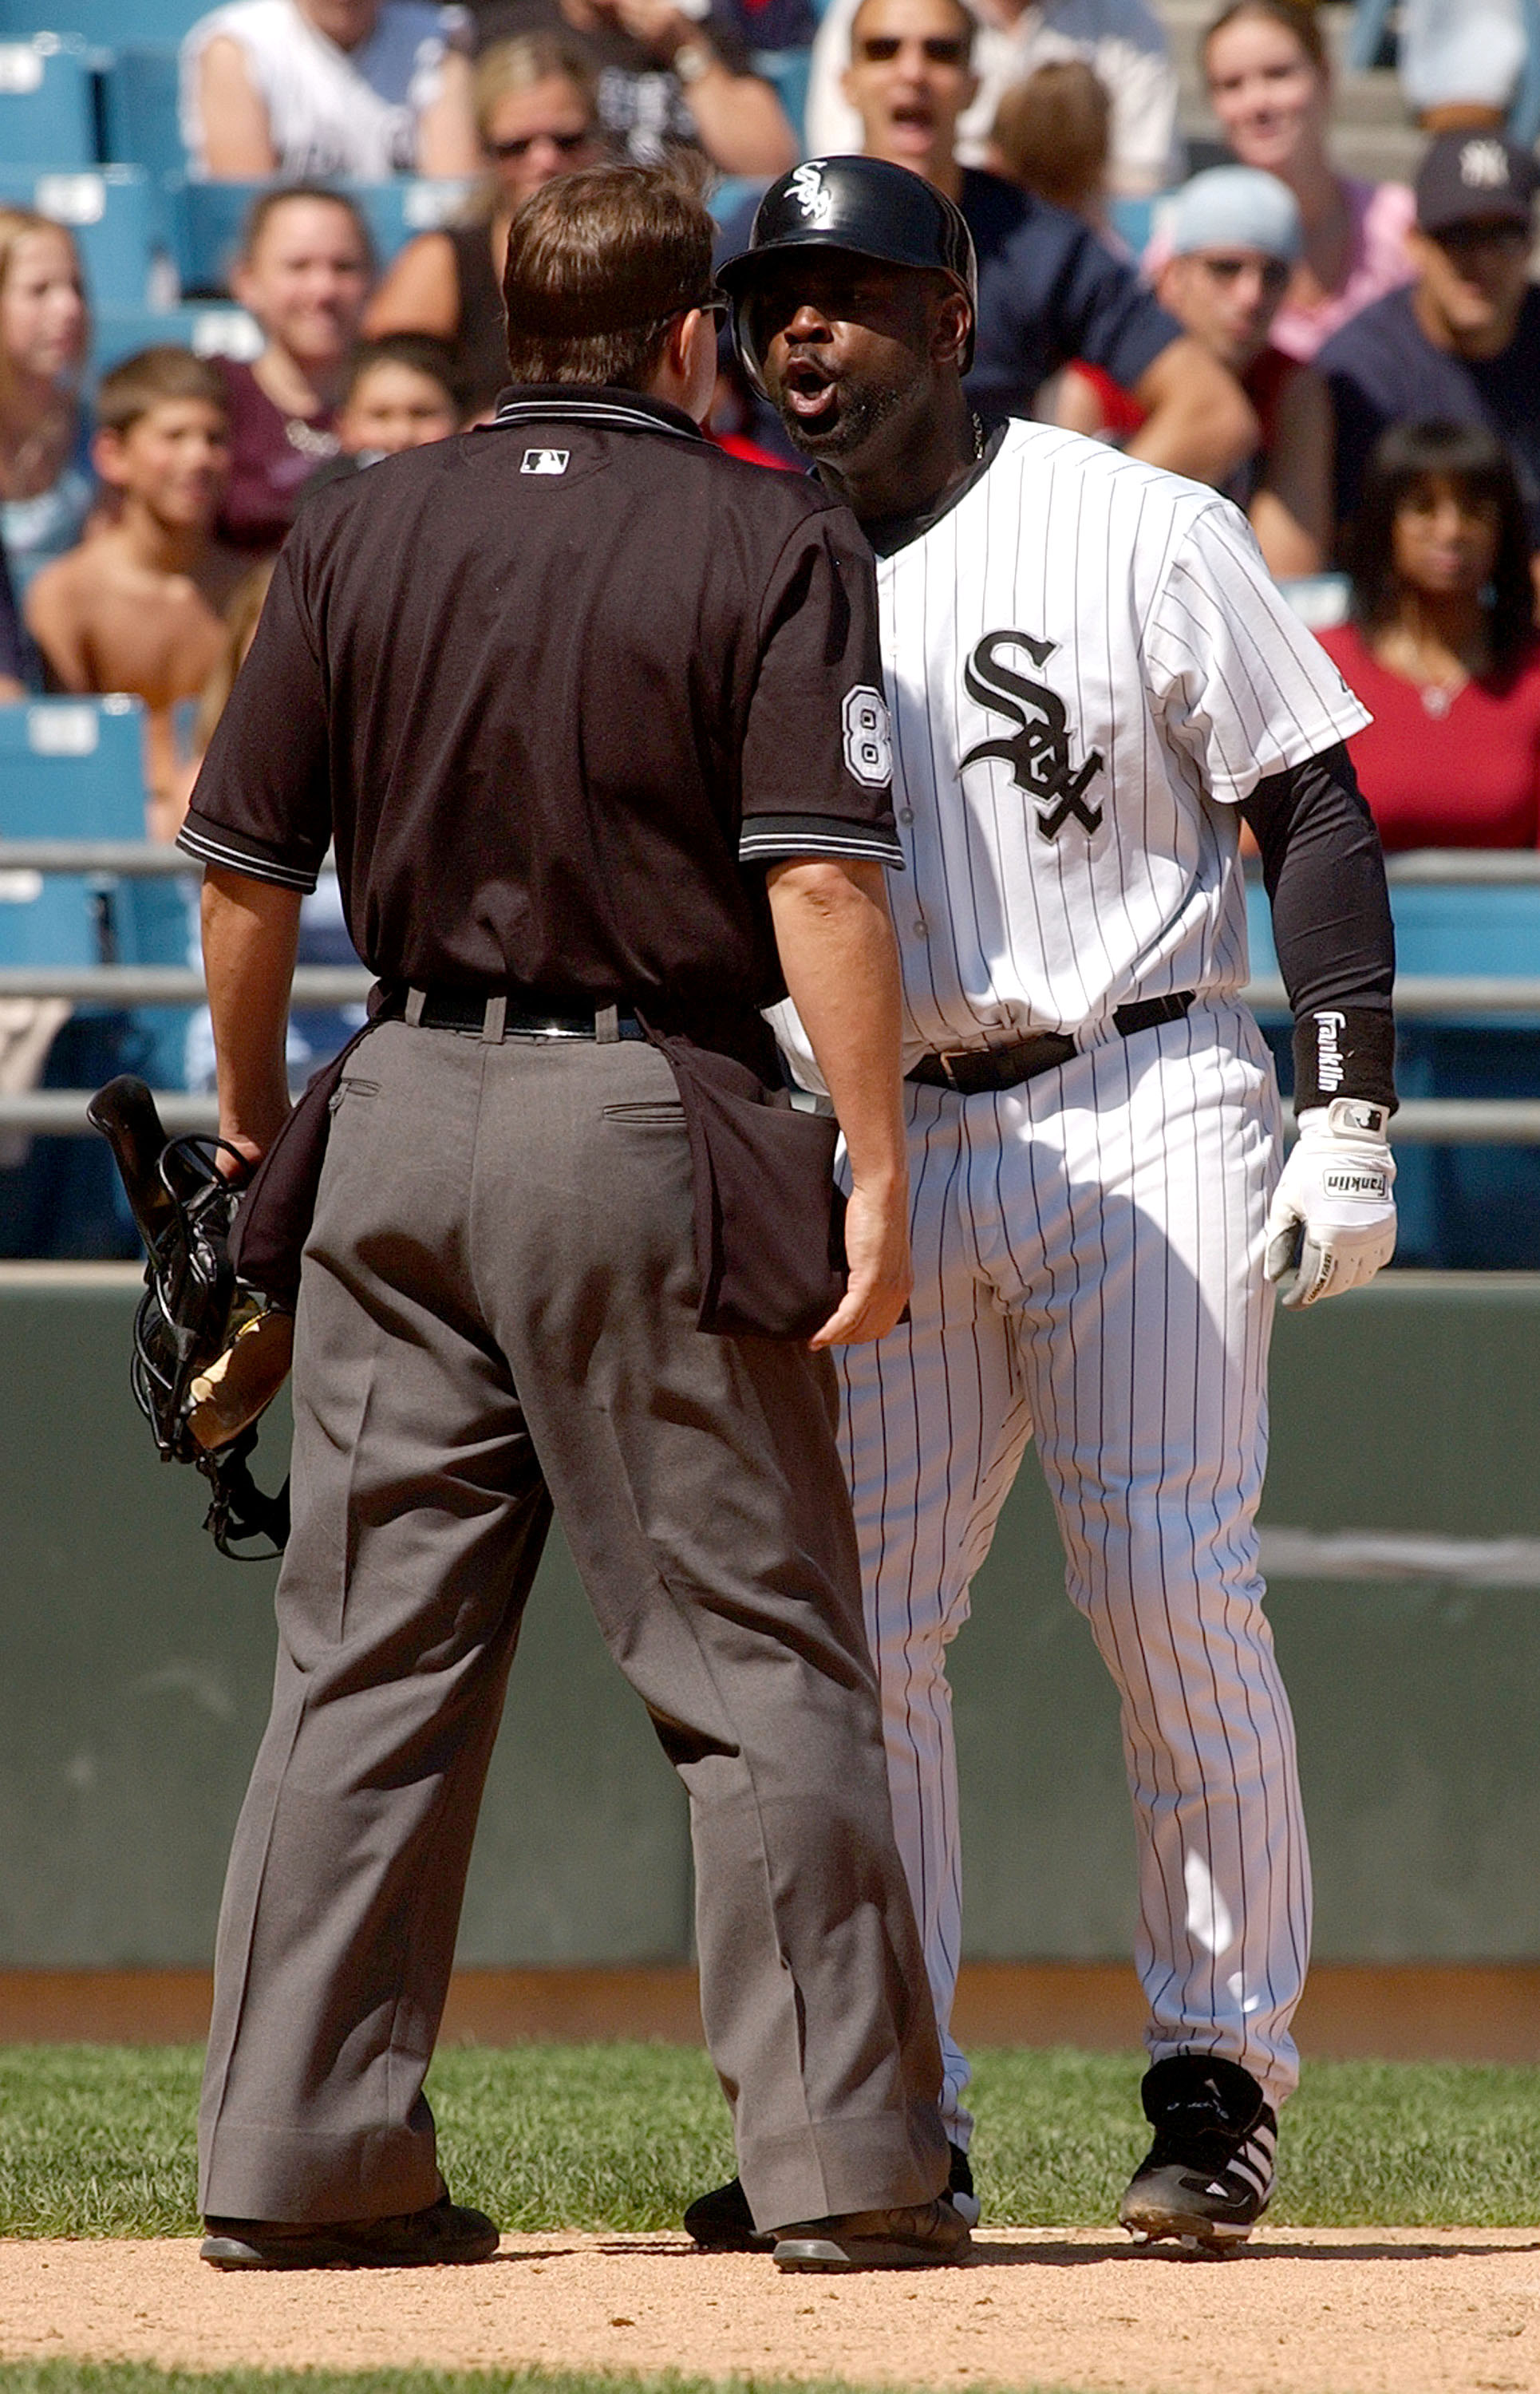 CHICAGO - AUGUST 21:  Carl Everett #8 of the Chicago White Sox argues with home plate umpire Doug Eddings #88 after striking out with the bases loaded in the sixth inning during a game against the Boston Red Sox on August 21, 2004 at U.S. Cellular Field i